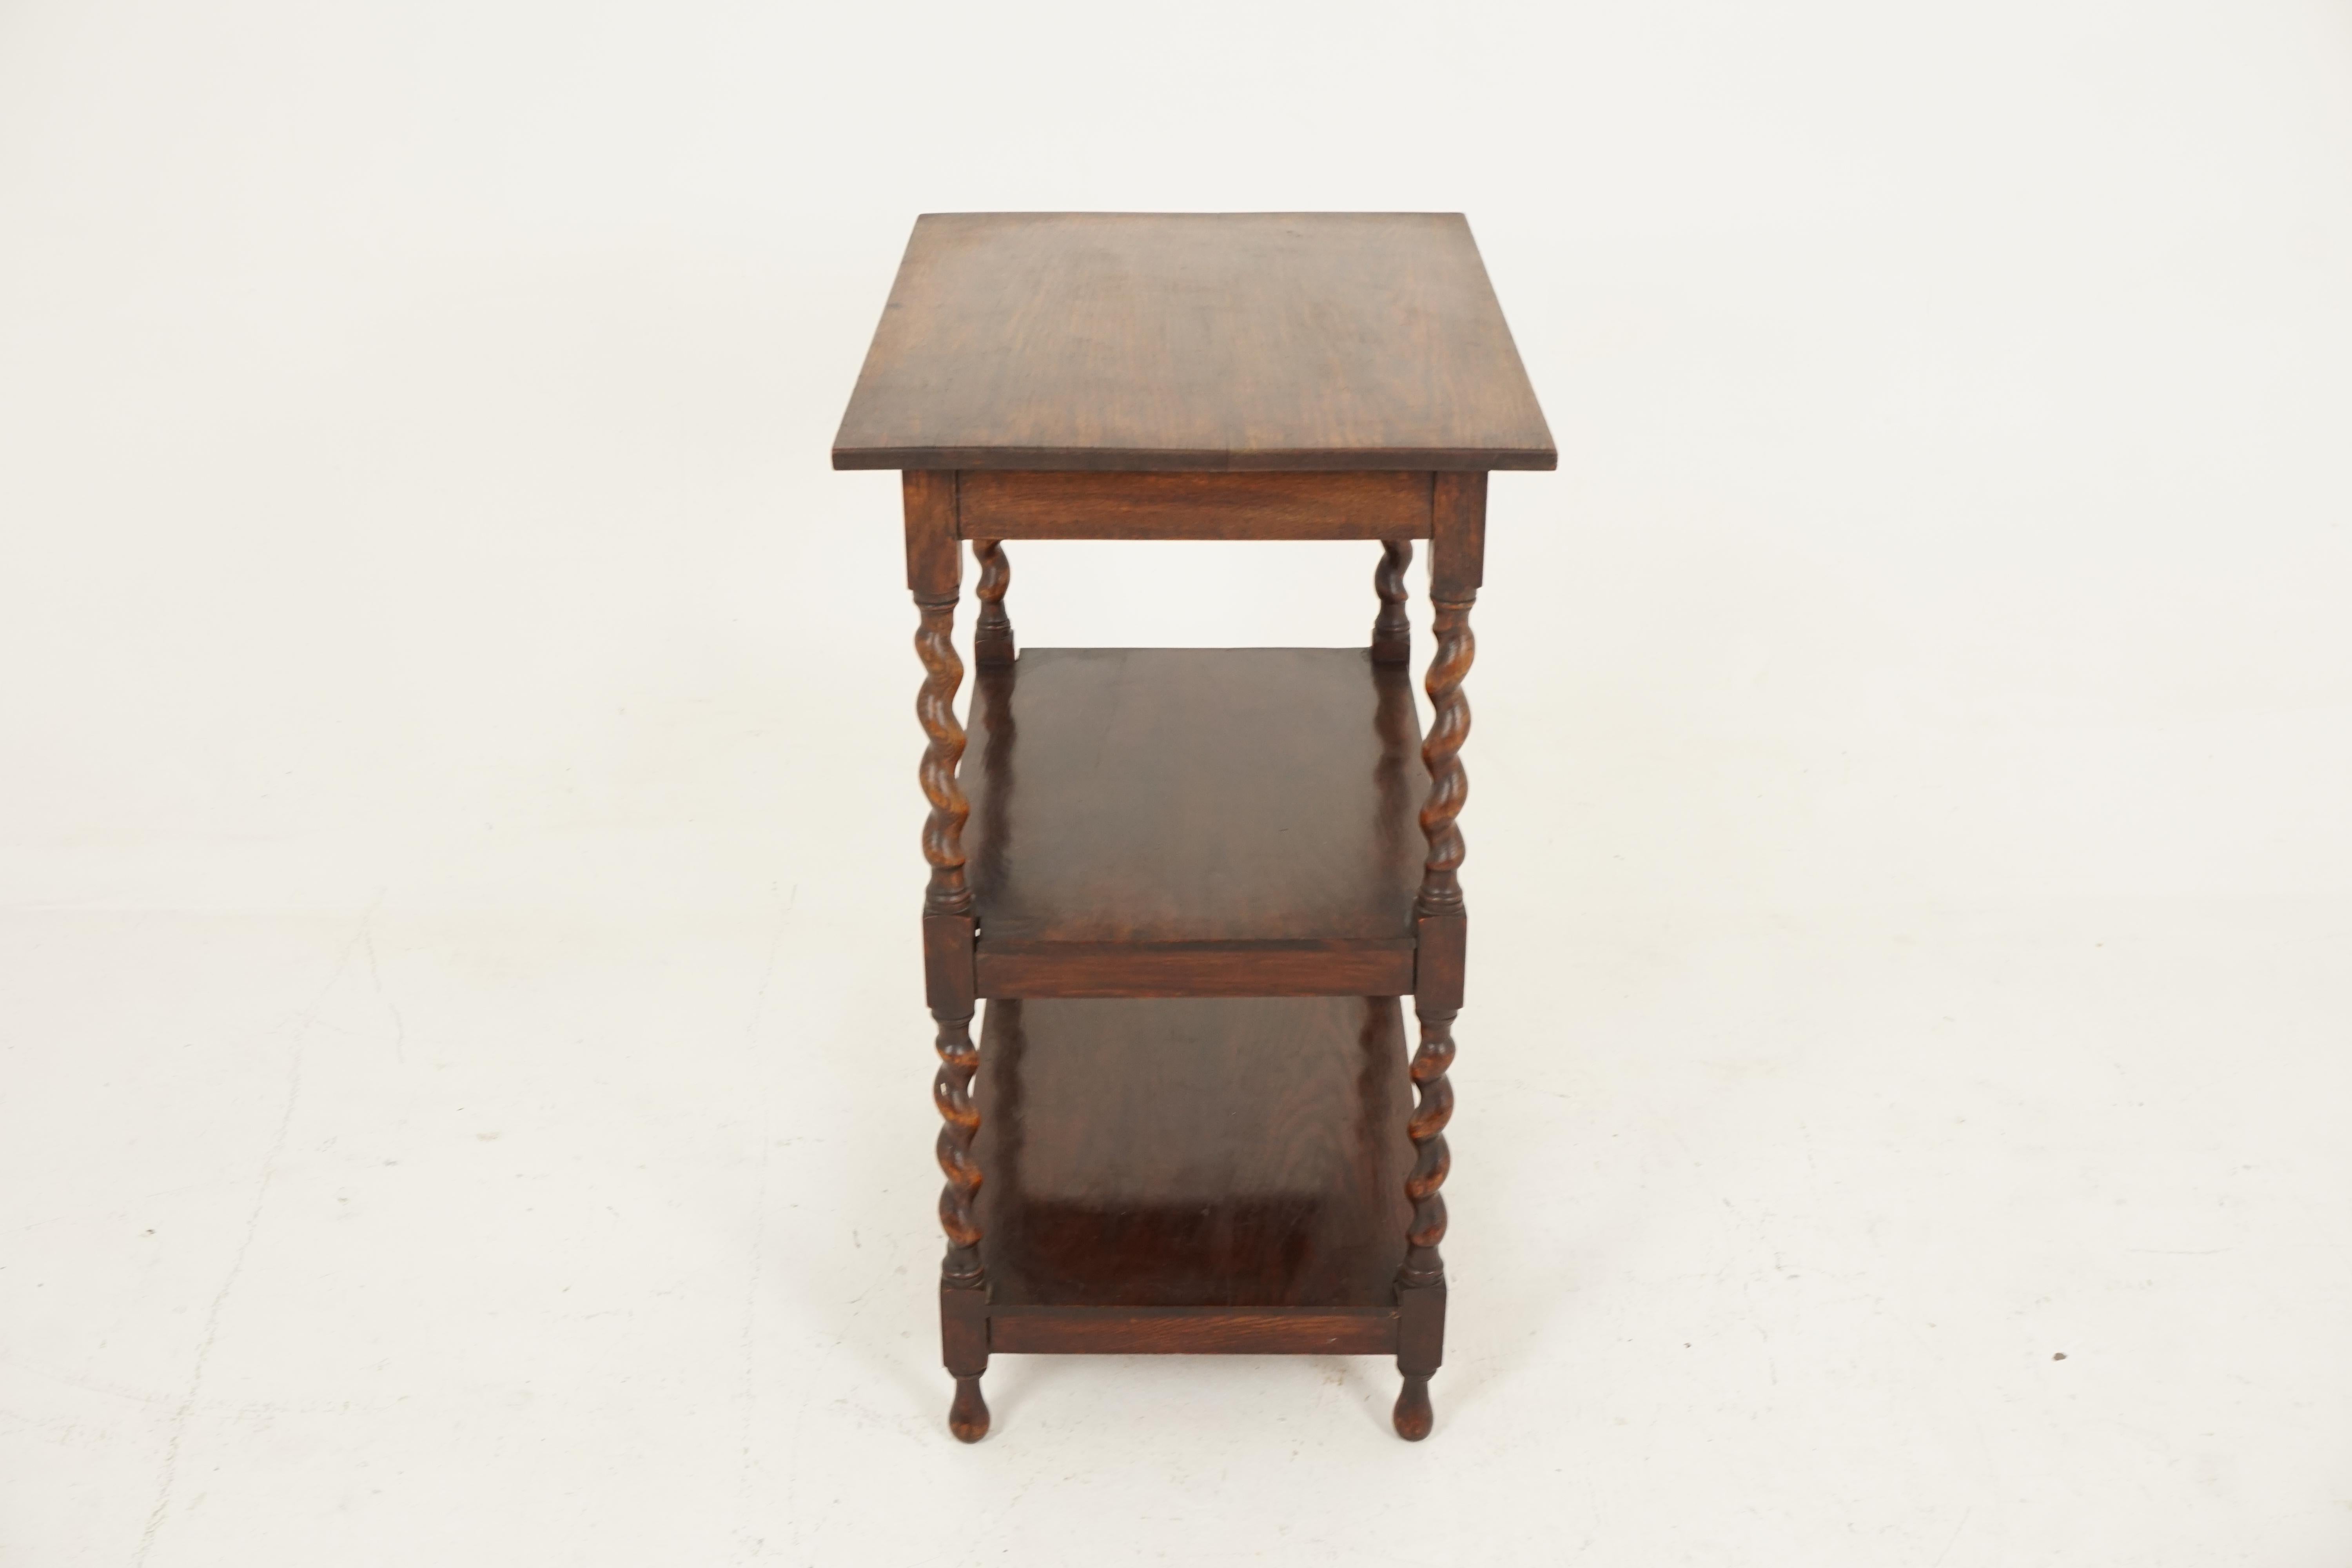 Hand-Crafted Antique Barley Twist 3 Tier Tiger Oak Table, Side or Lamp, Scotland 1910, B2349